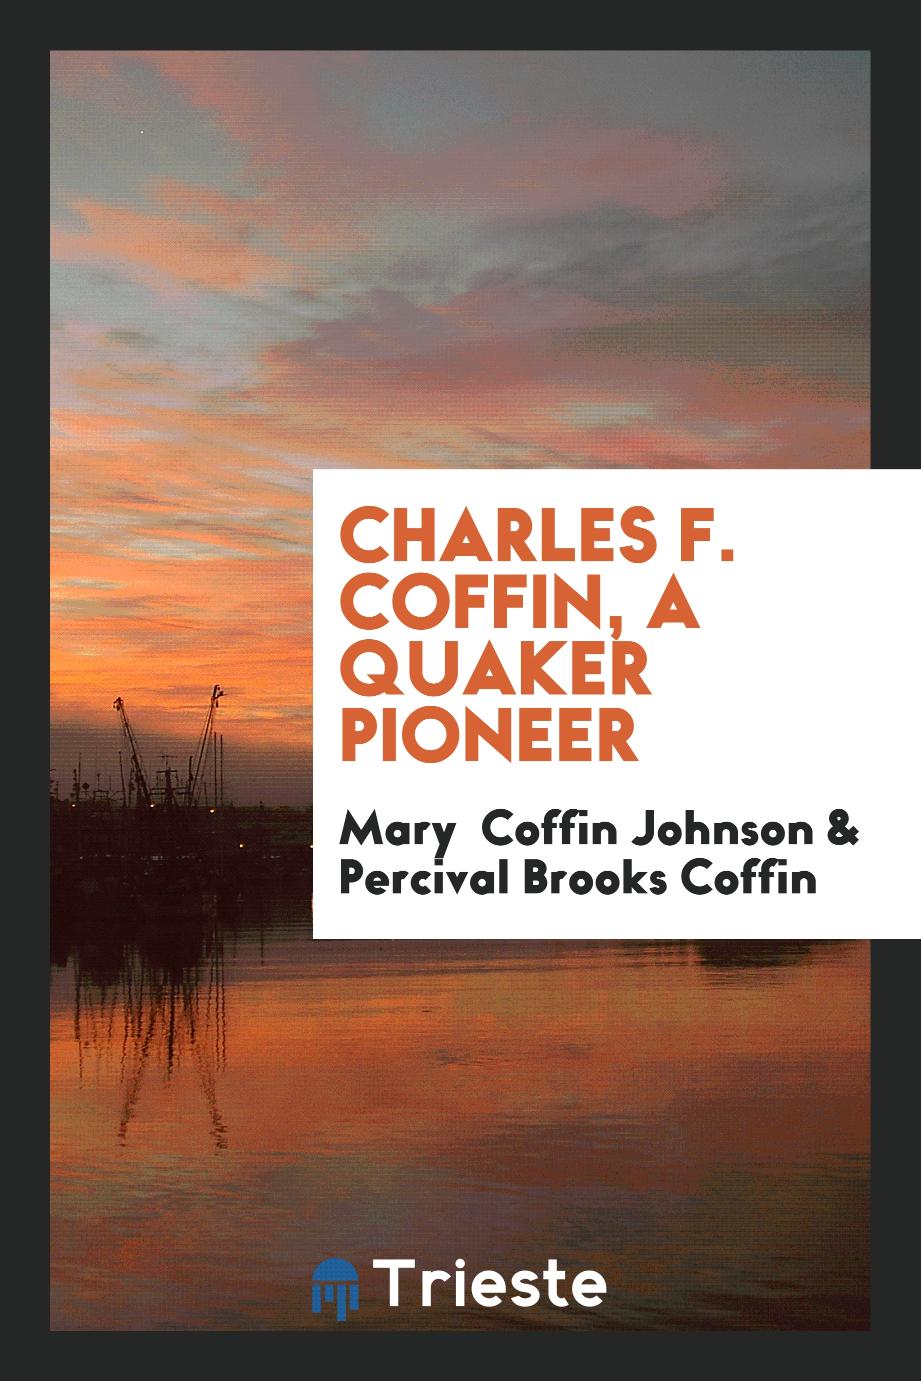 Charles F. Coffin, a Quaker pioneer